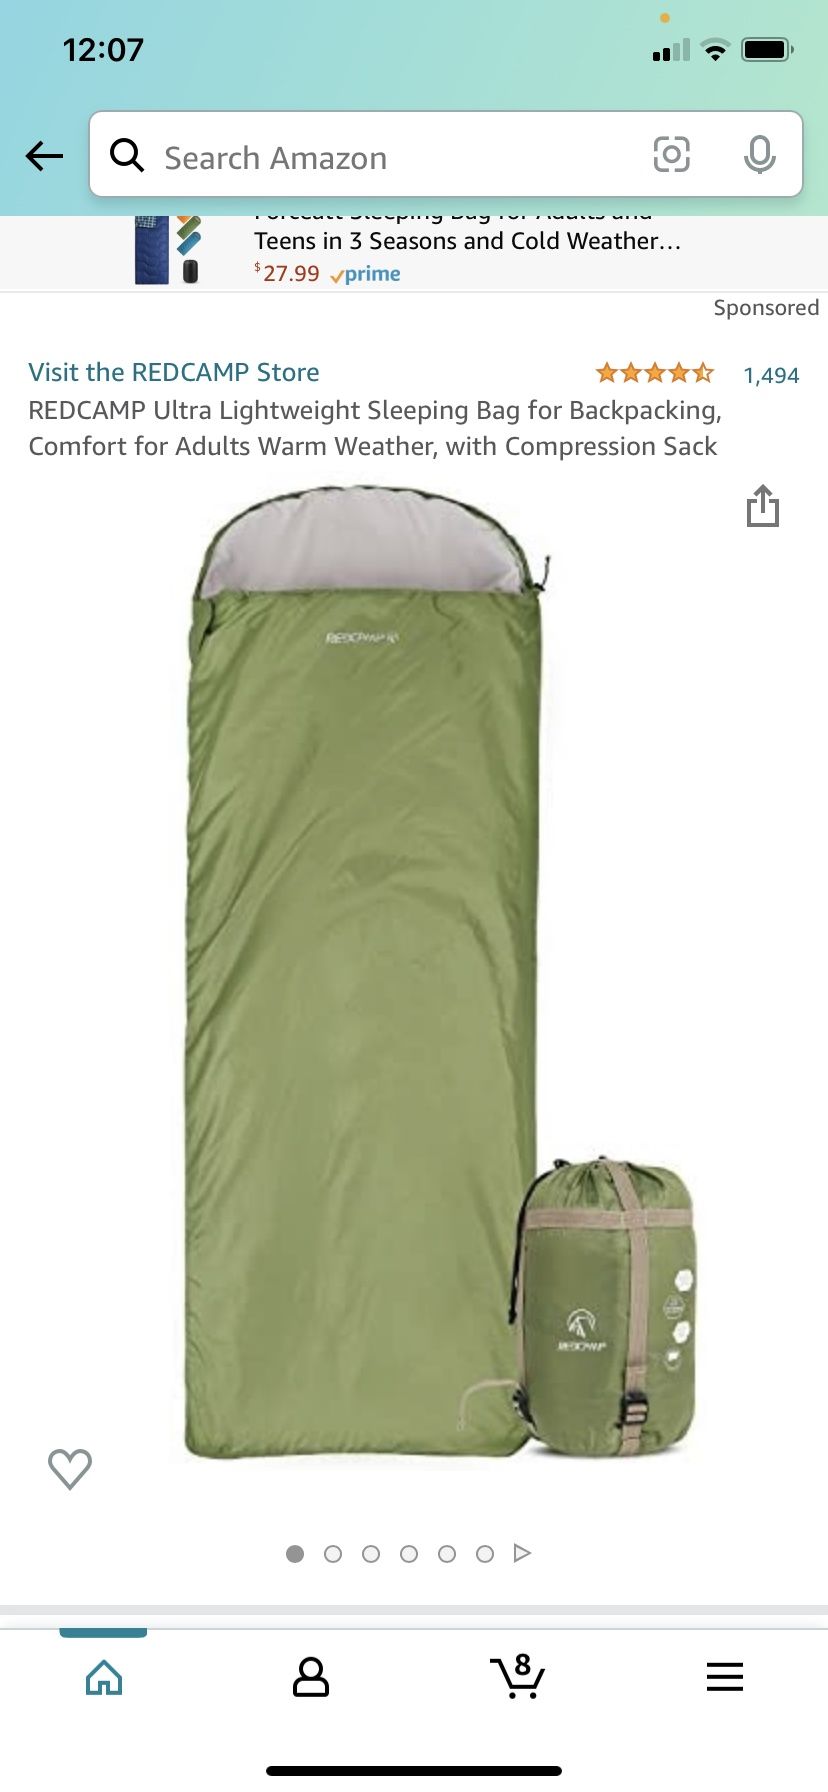 REDCAMP Ultra Lightweight Sleeping Bag for Backpacking, Comfort for Adults Warm Weather, with Compression Sack